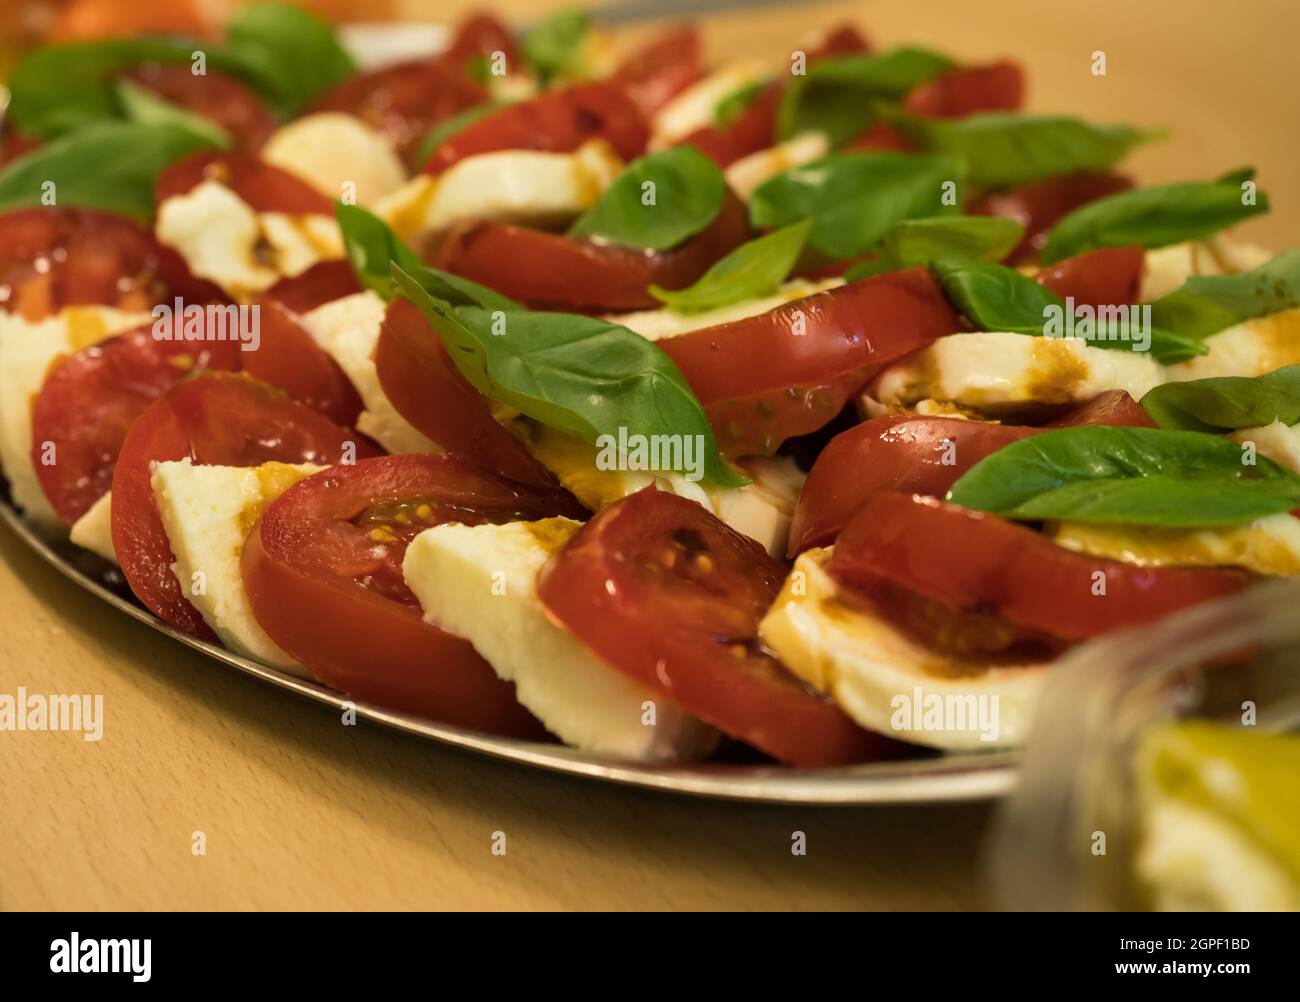 A side closeup of mediterran food on a plate Stock Photo